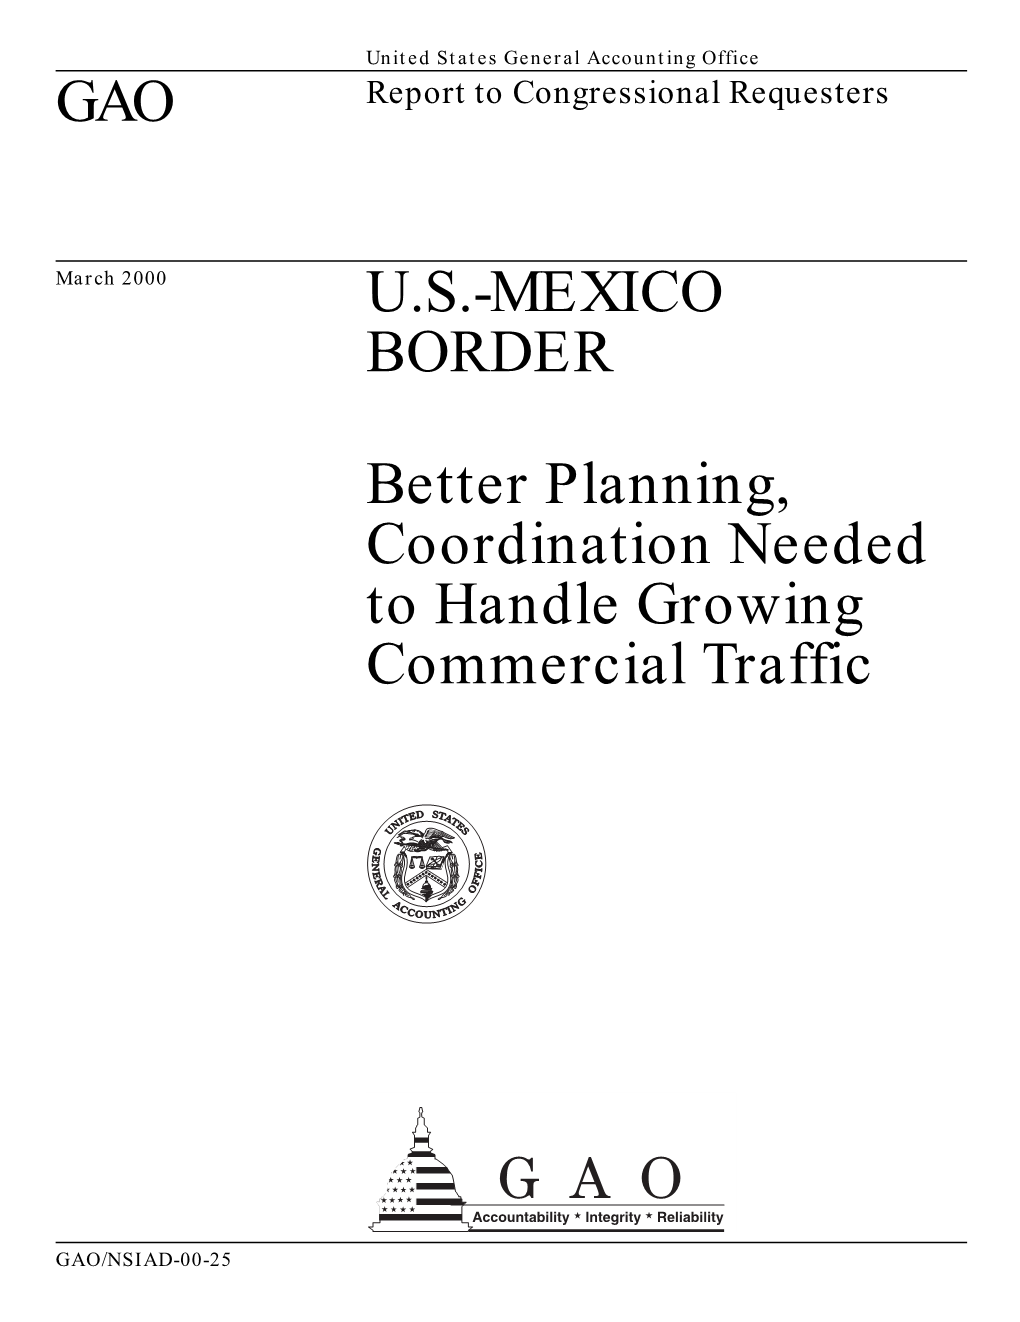 GAO U.S.-MEXICO BORDER Better Planning, Coordination Needed To